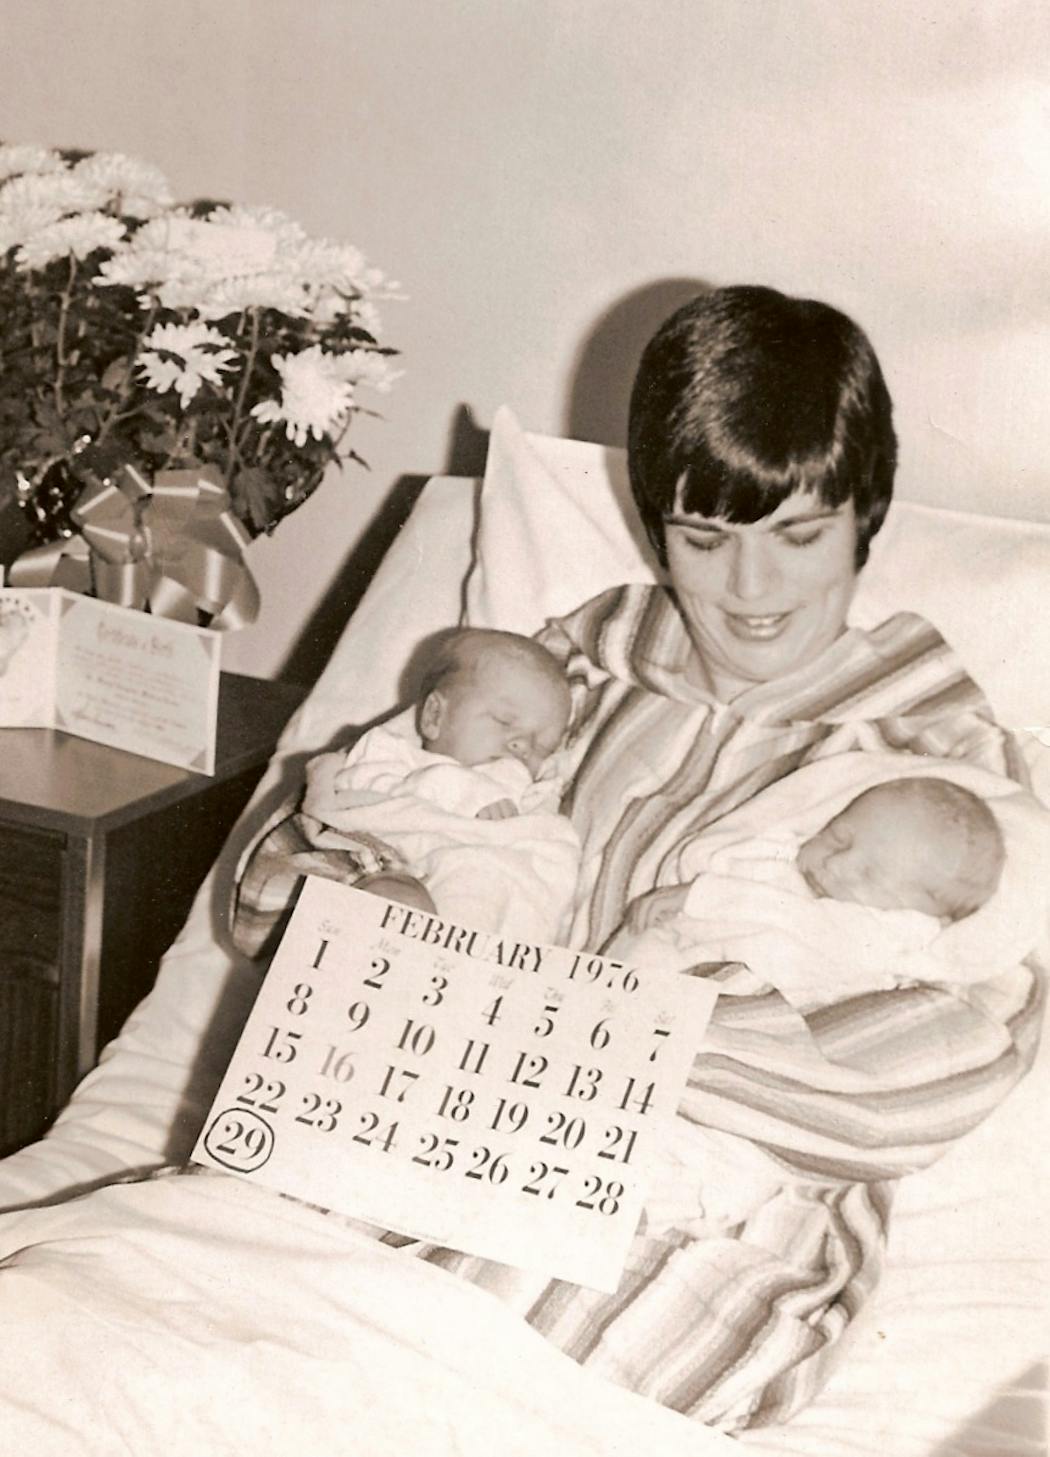 In 1976, Sara Whalen held her surprise twins, Nora and Ruth, after delivering them on Leap Day at a hospital in Madison, Wis.